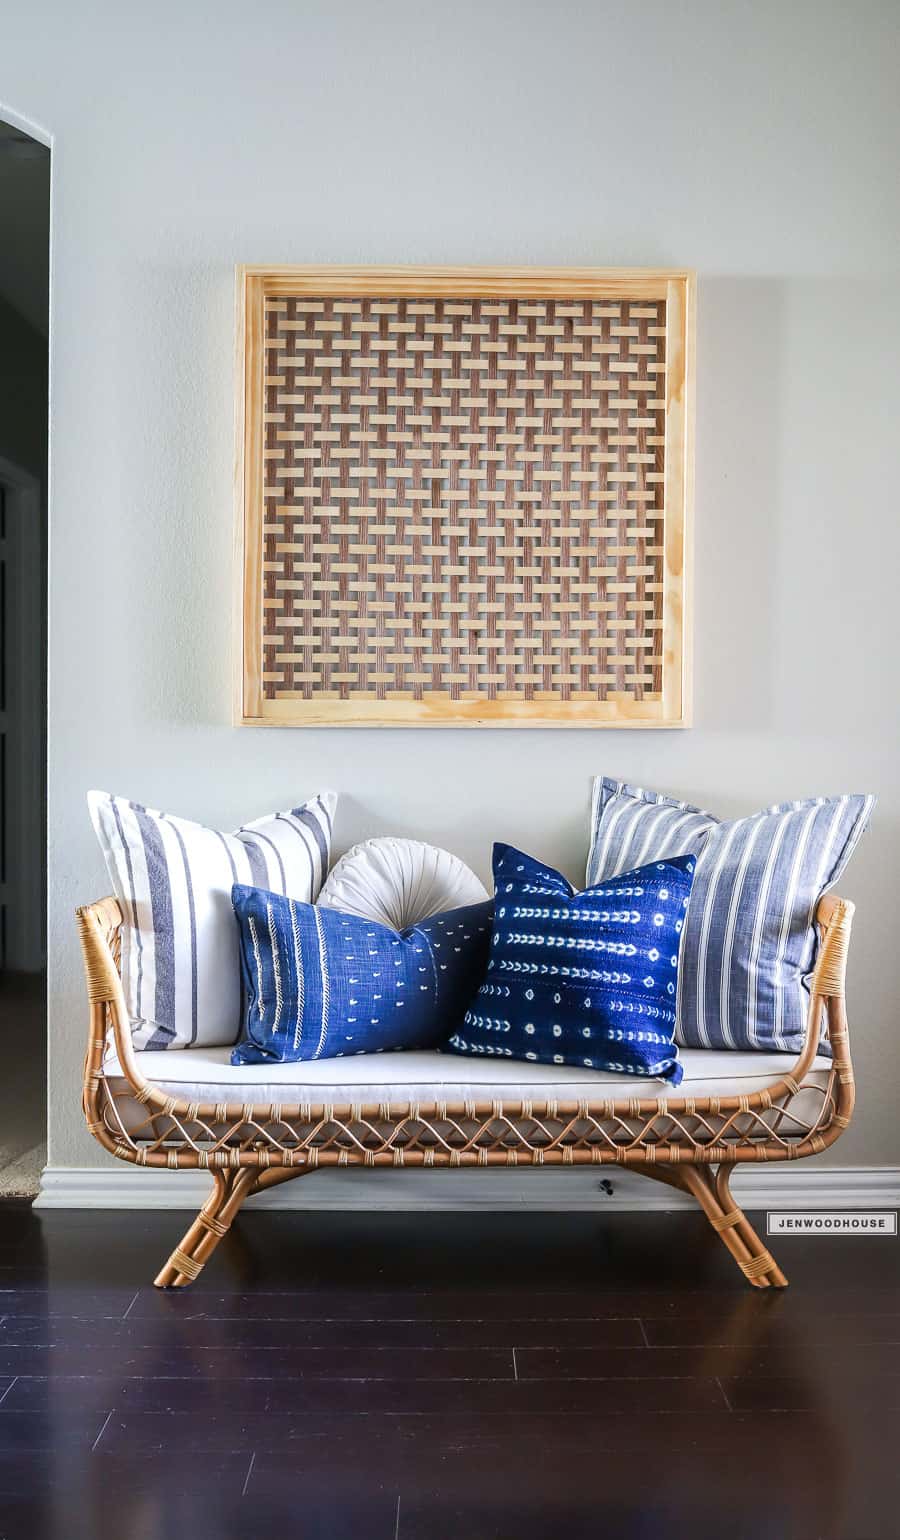 Natural basket weave statement art against neutral wall hung above wicker settee with blue and white pillows.